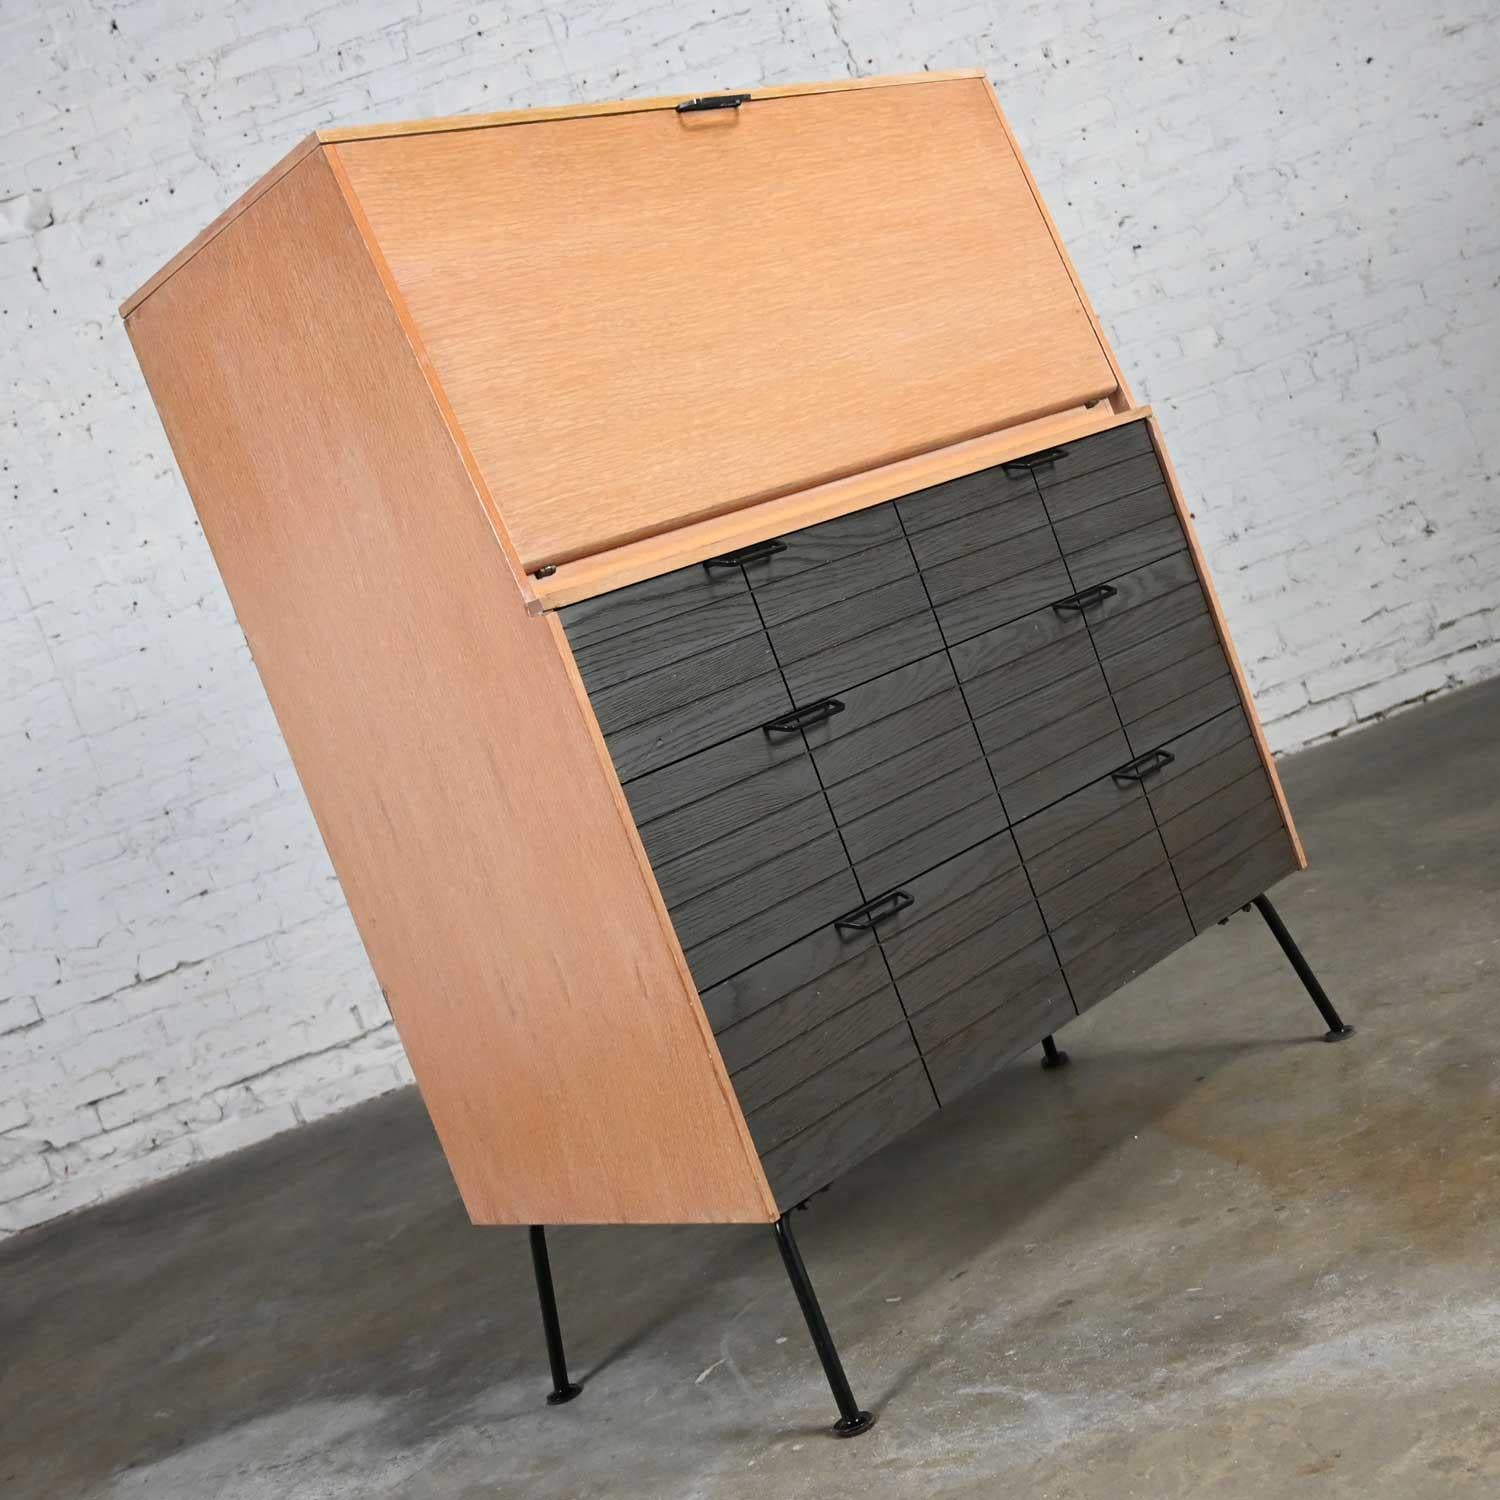 Handsome vintage Mid-Century Modern Mengel drop front secretary desk by Raymond Loewy. Comprised of an oak case, cerused oak drawer fronts, and black iron hardware and legs. Beautiful condition, keeping in mind that this is vintage and not new so